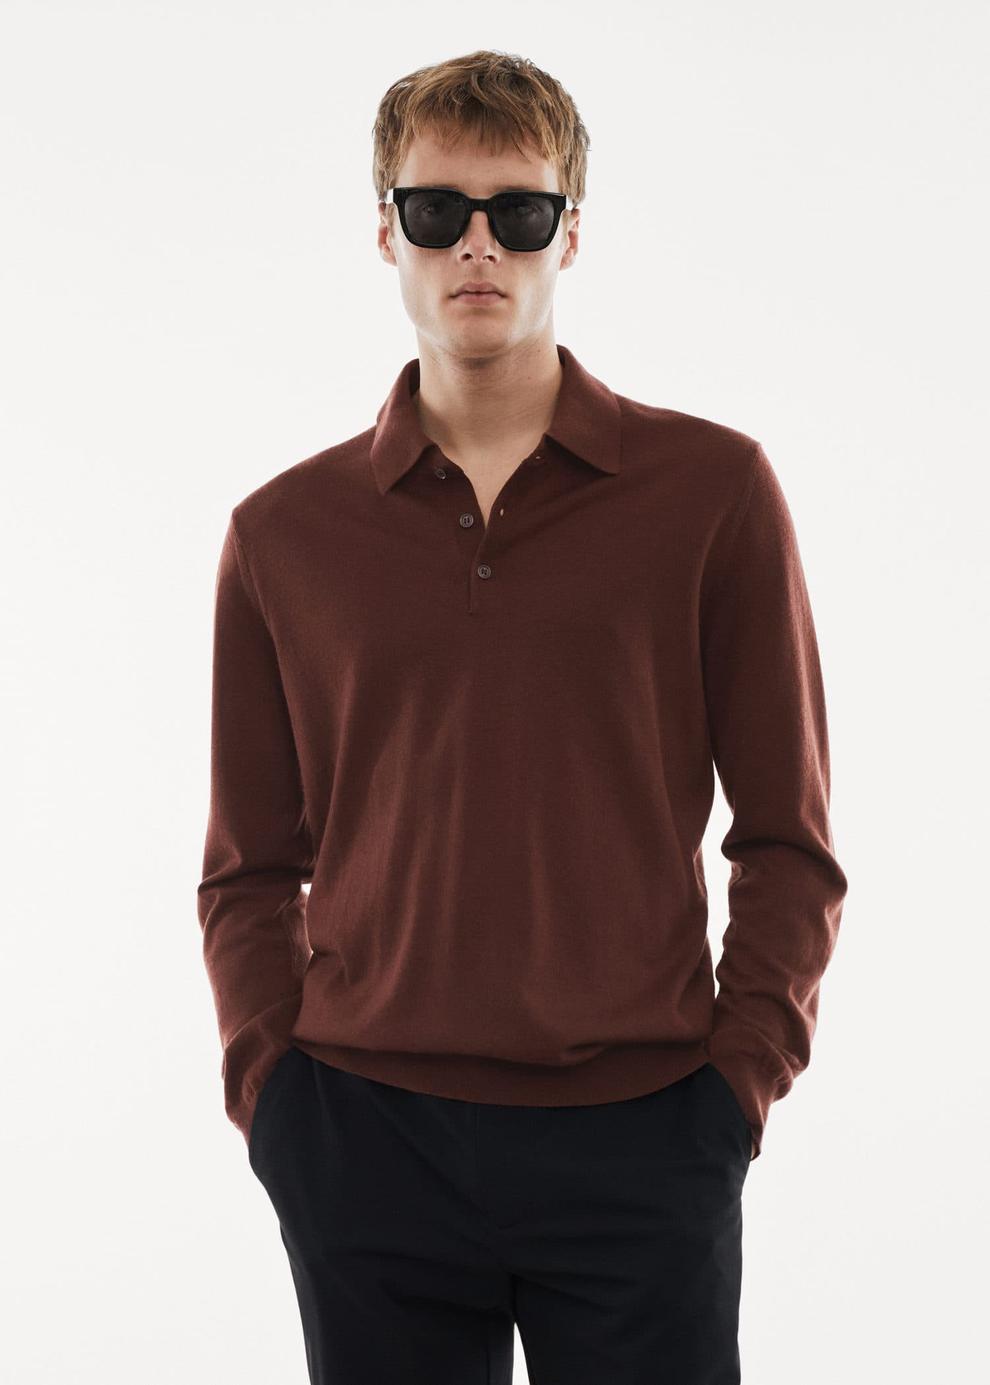 100% merino wool long- sleeved polo shirt offers at S$ 89.9 in HE by Mango